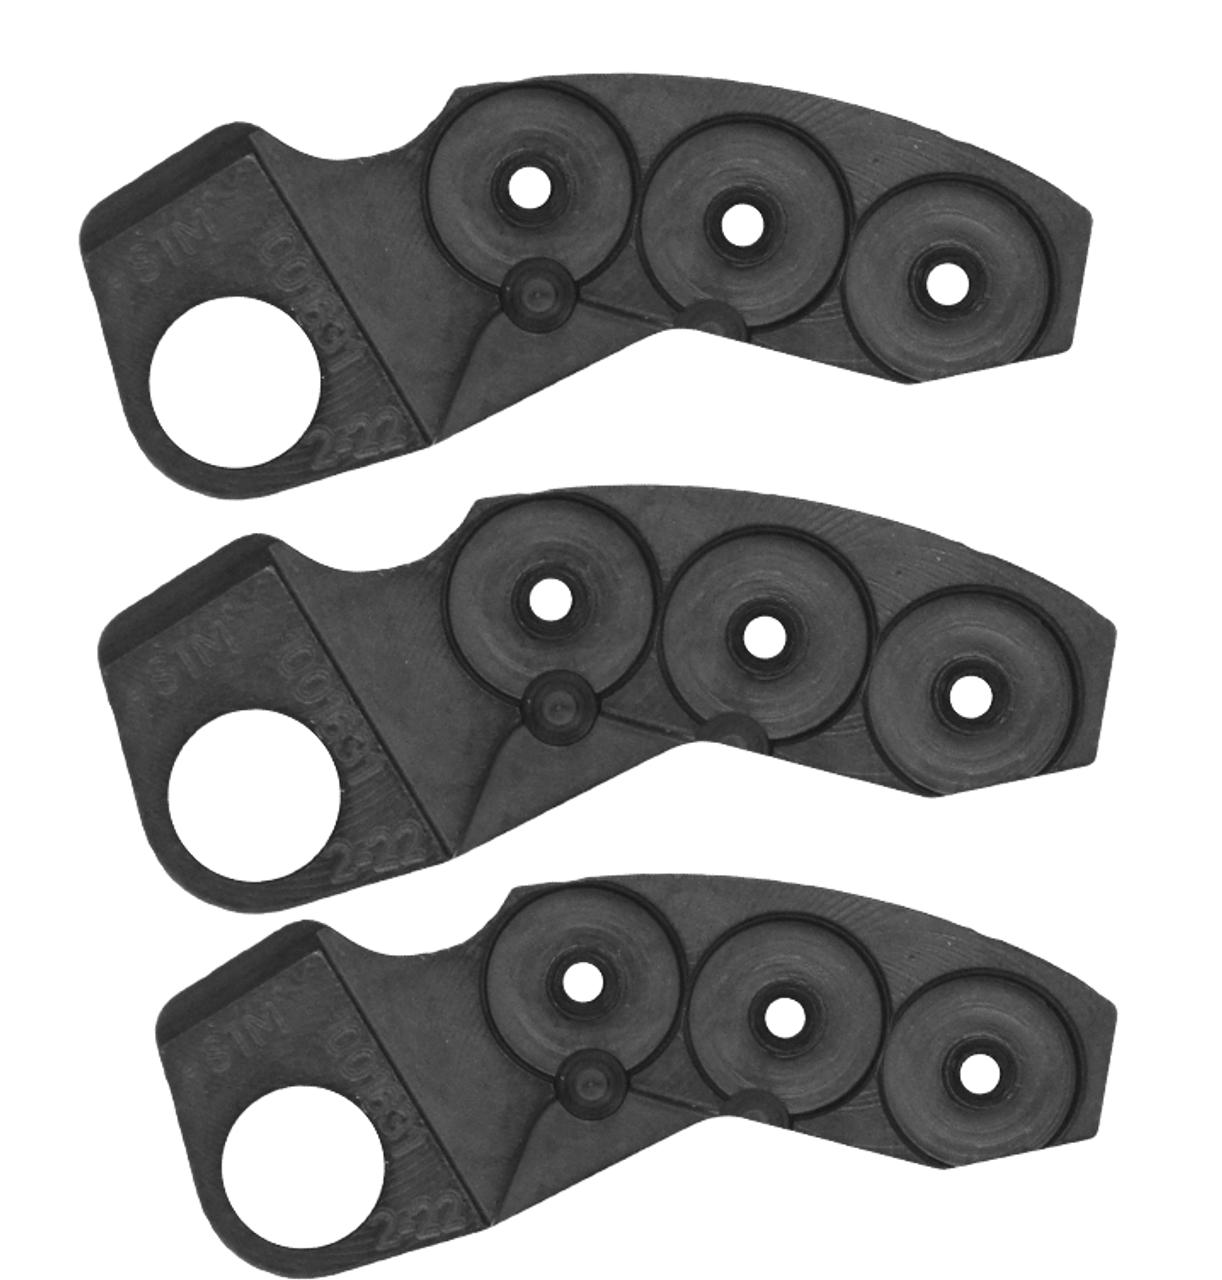 HBRN Series Supertip Notched Cam Arms-Clutch Weights-STM-1 Arm (no fasteners)-60 Gram Base .470 wide HBRN Series Part# 1001631-Capture Pin Bushings WCP Style Primary clutches .470 wide cam arms 1001589 + $12 per arm-Black Market UTV